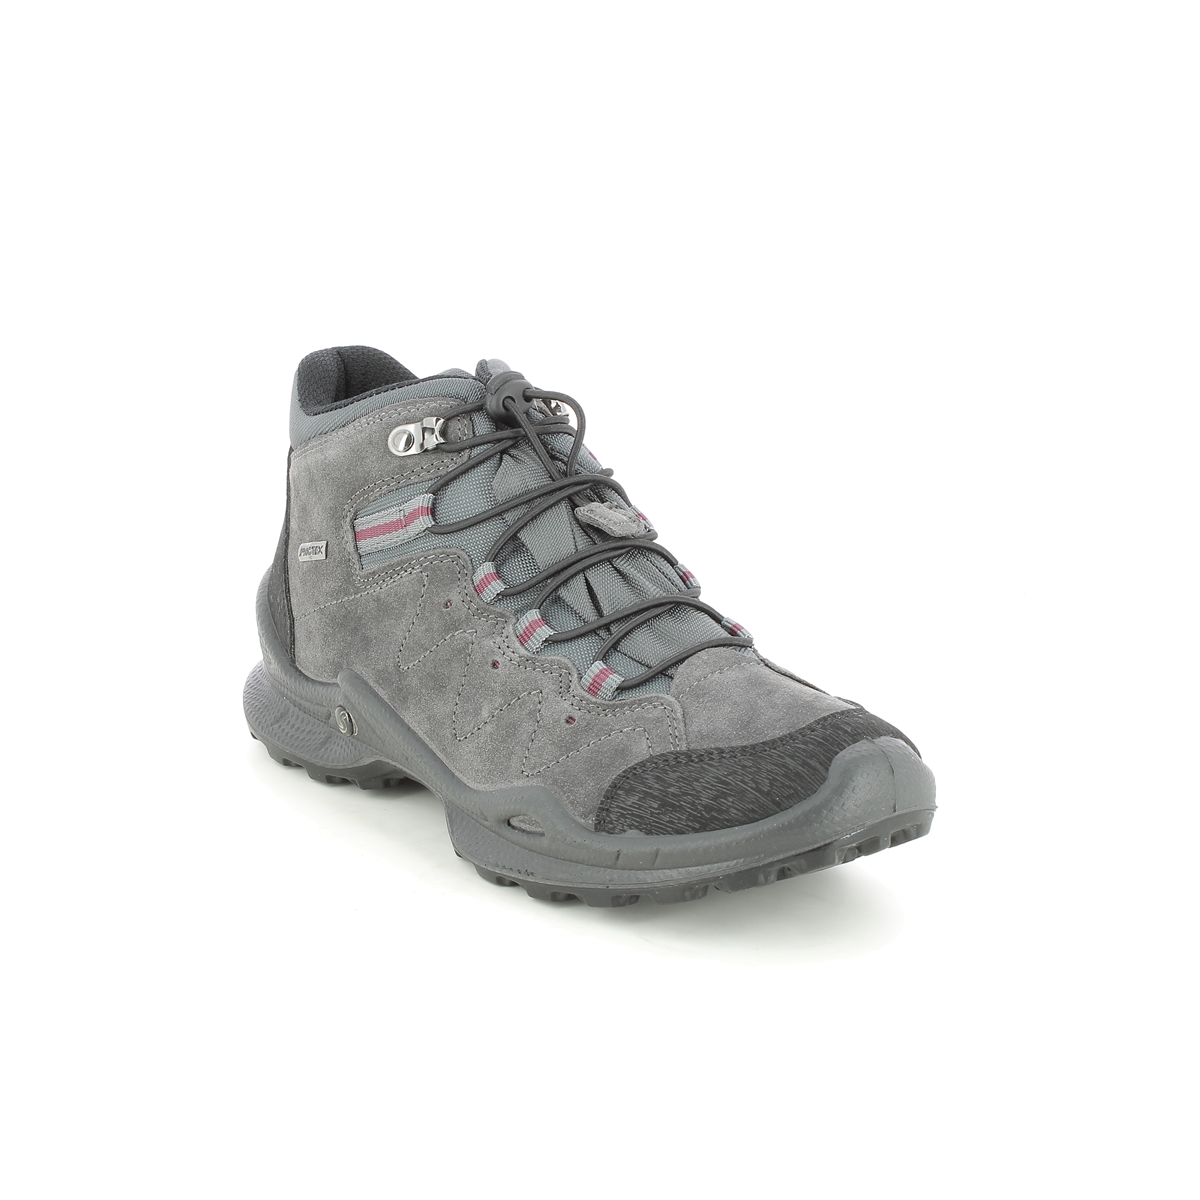 Imac Foxy   Boot Tex Grey Suede Womens Walking Boots 8819-7104018 In Size 42 In Plain Grey Suede